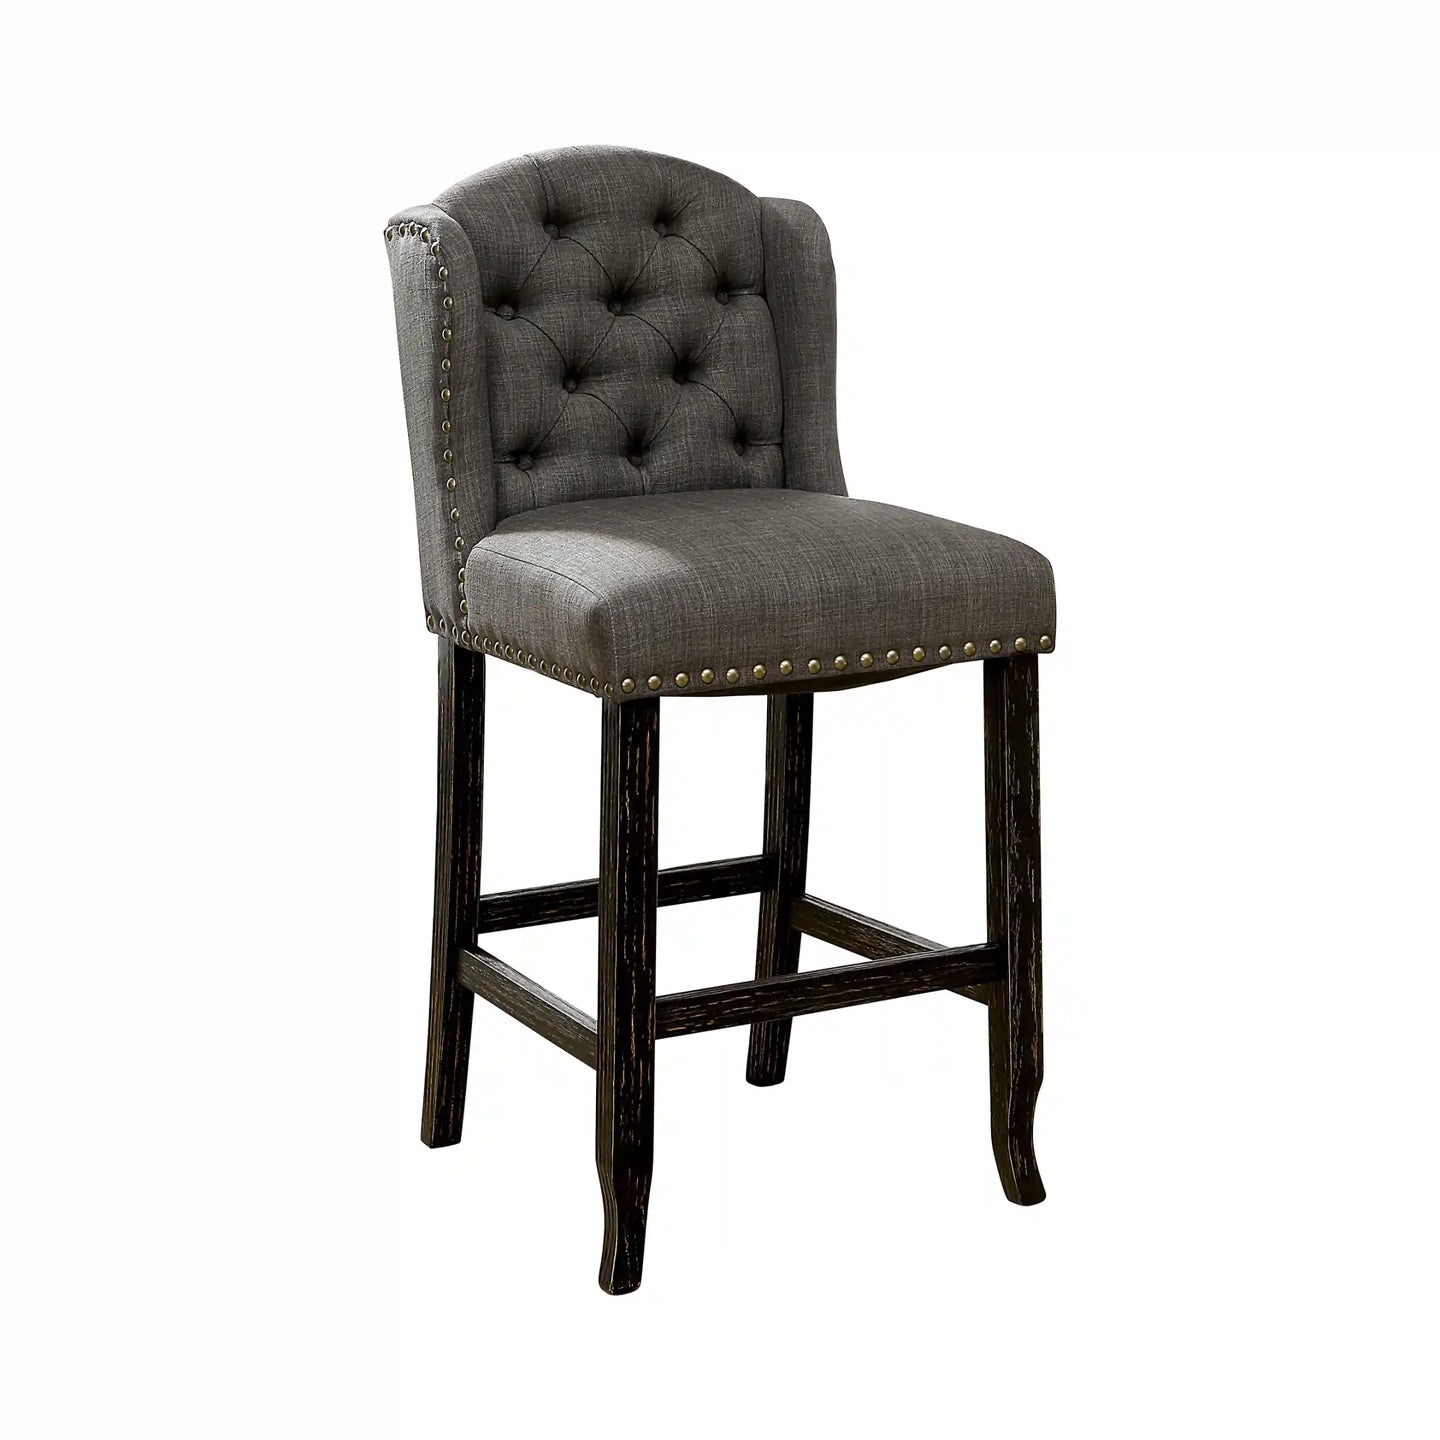 Furniture of America Lubbers Rustic Button Tufted Bar Chairs in Gray and Antique Black (Set of 2) - IDF-3324BK-GY-BCW